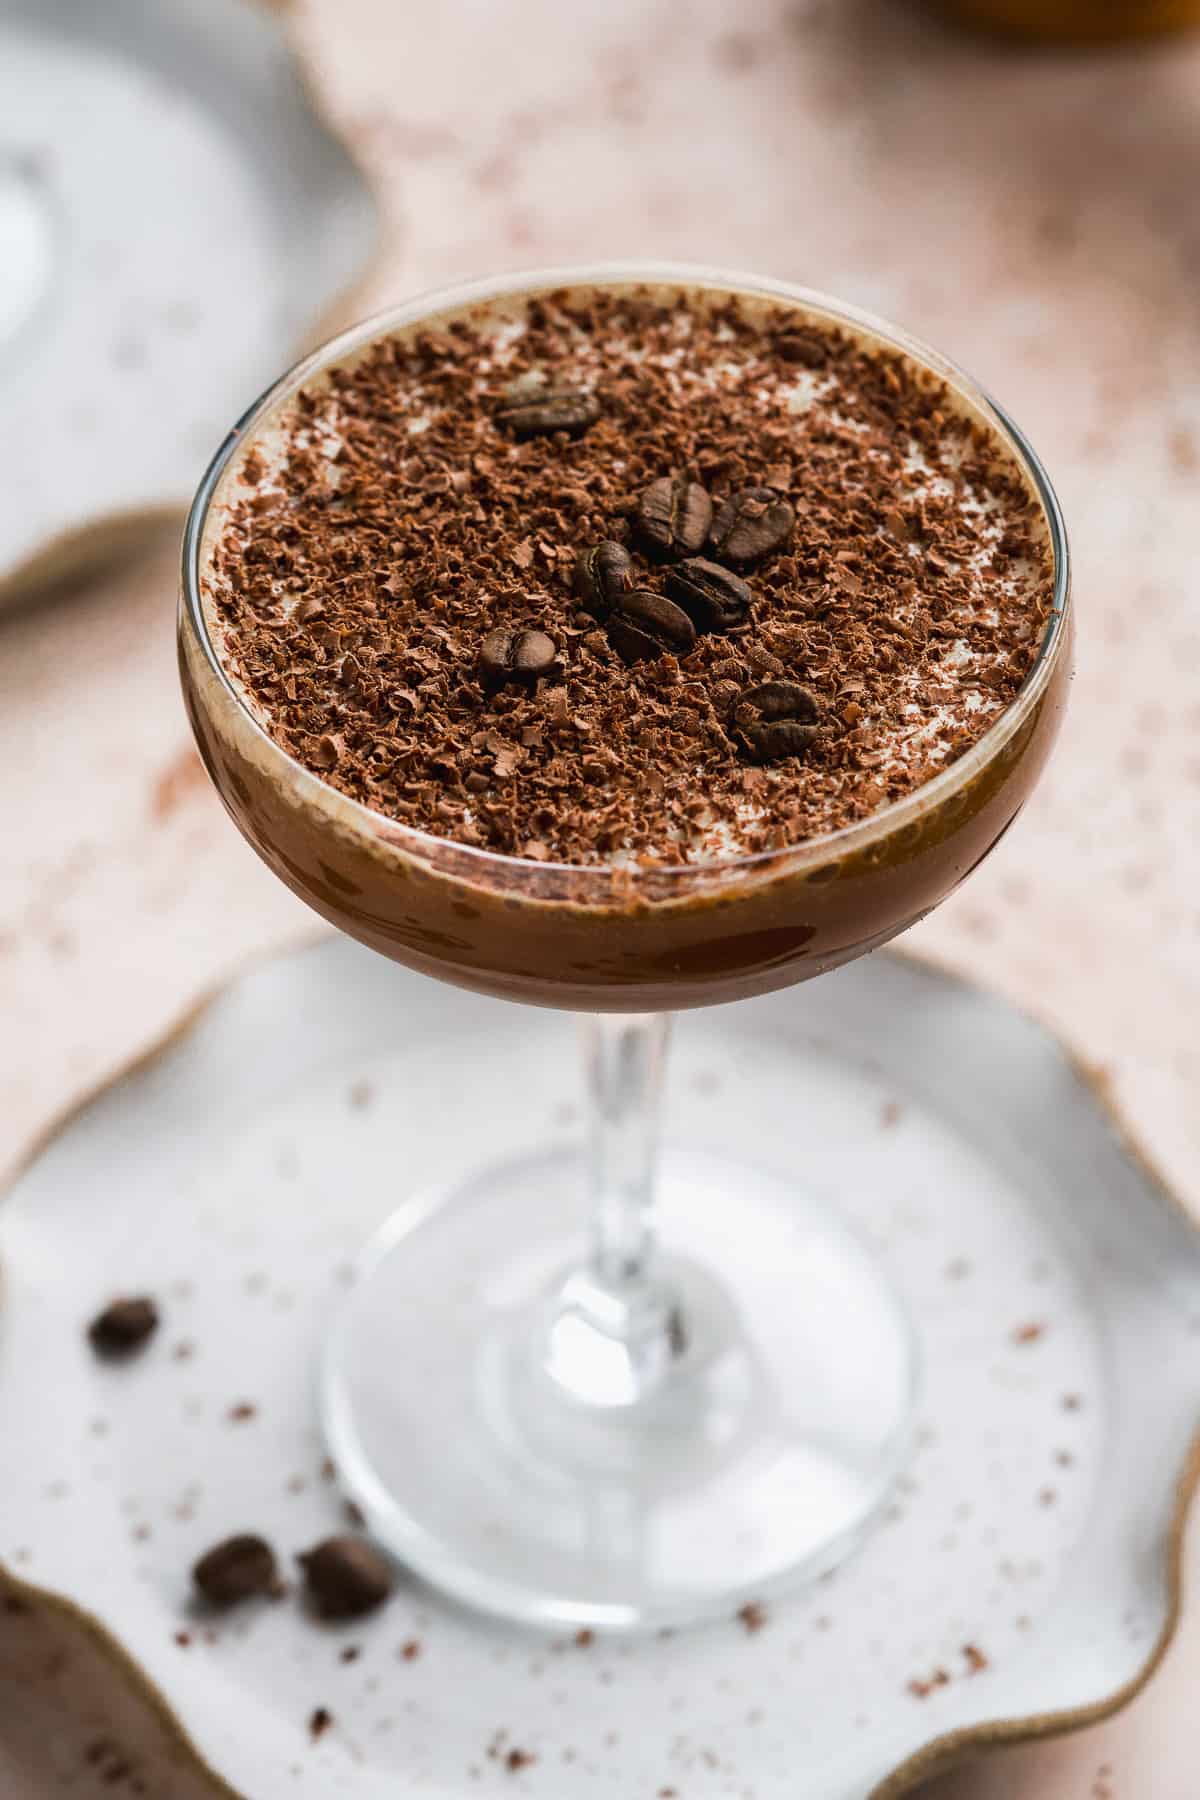 Chocolate drink in a cocktail glass with chocolate shavings and espresso beans.